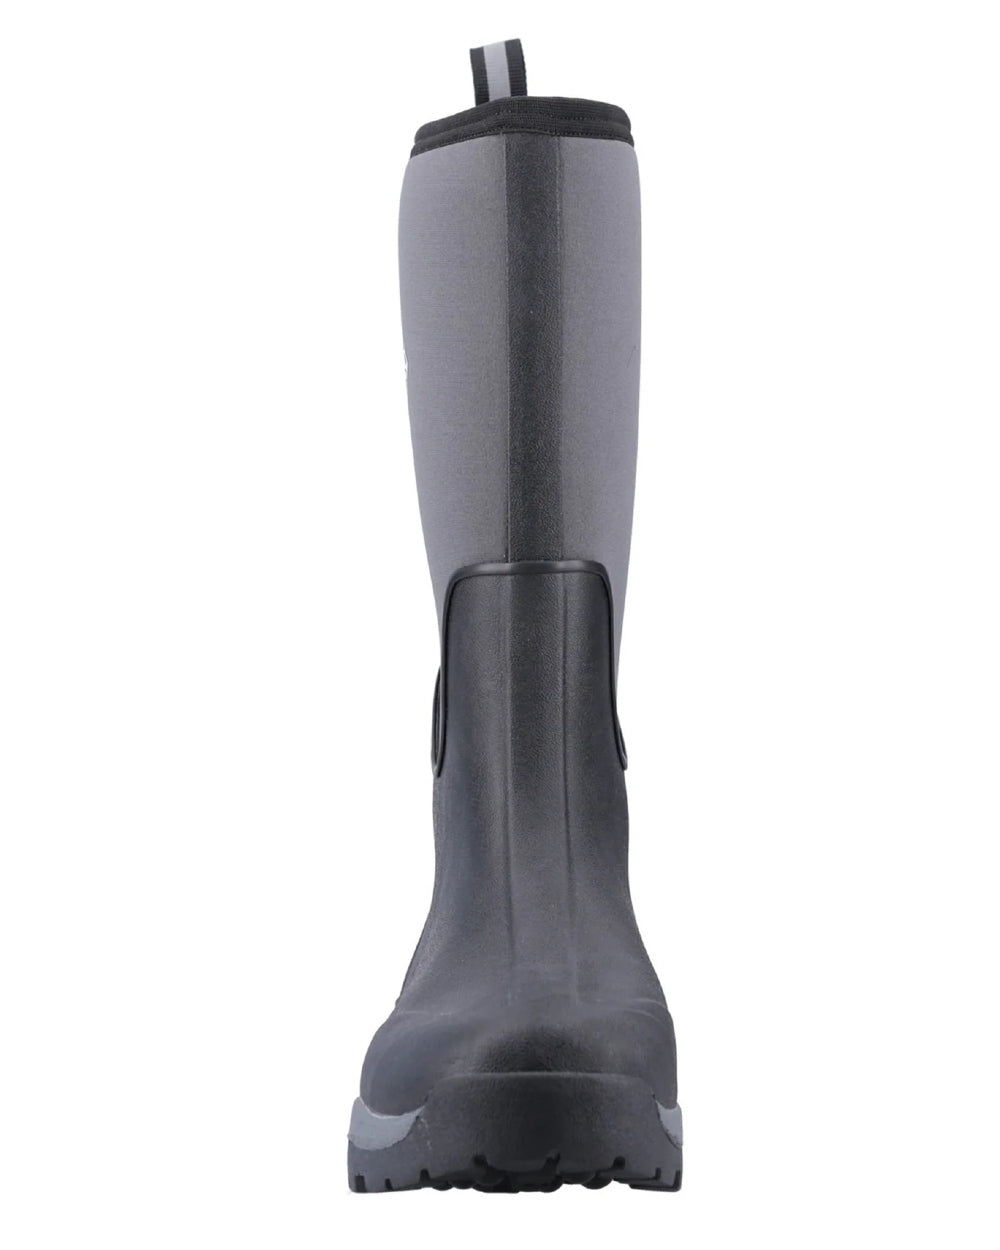 Black Coloured Muck Boots Unisex Calder Short Boots On A White Background 